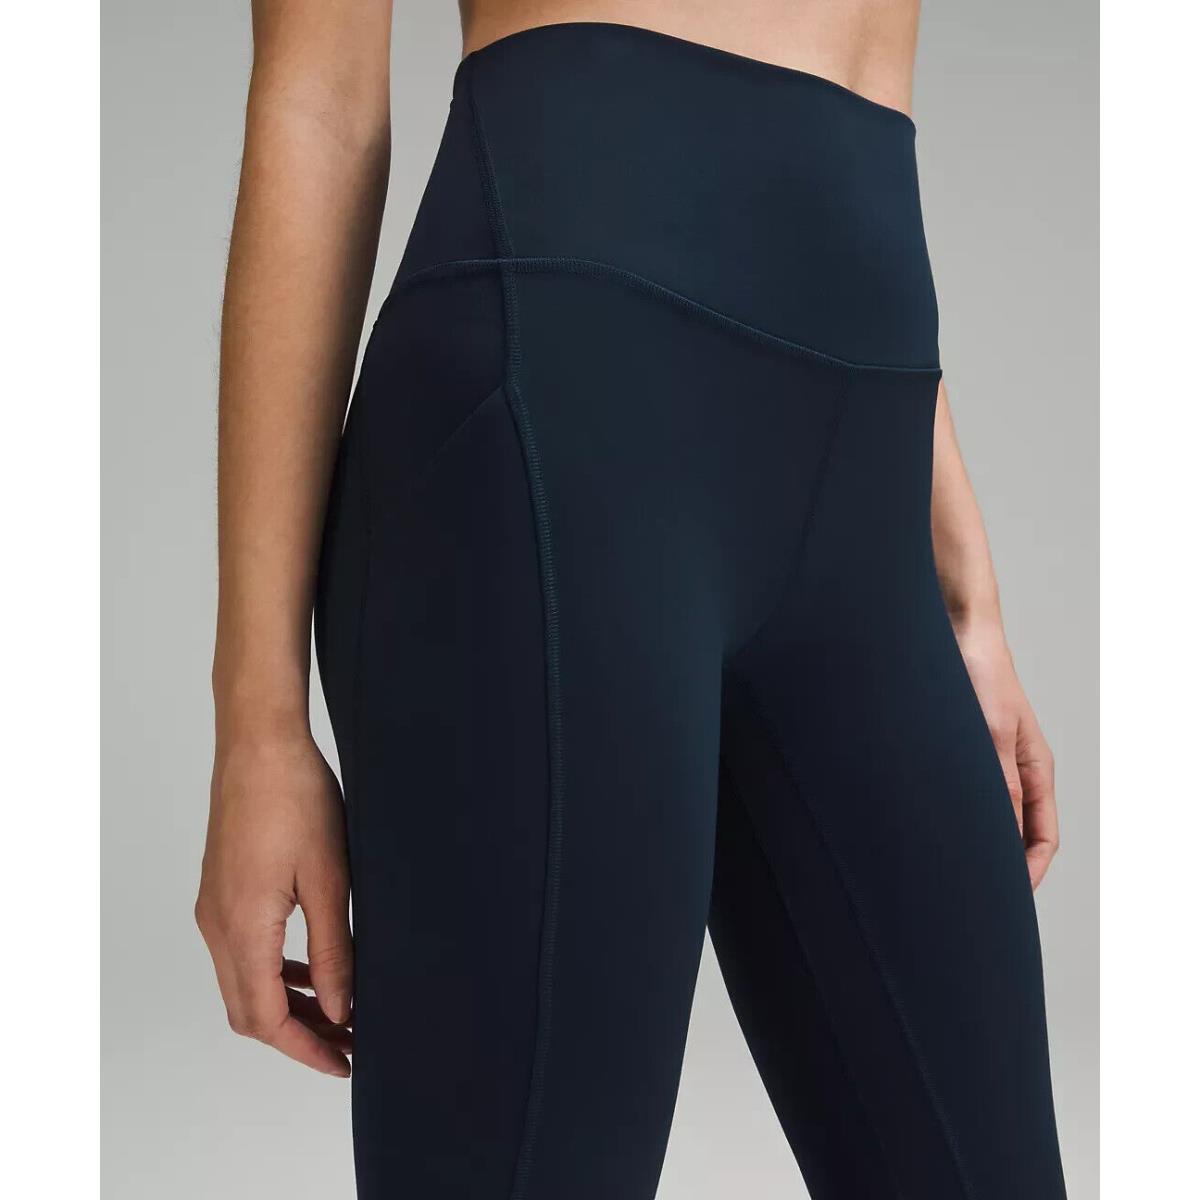 Lululemon Align High-rise Pant with Pockets 25 Color True Navy Size 2